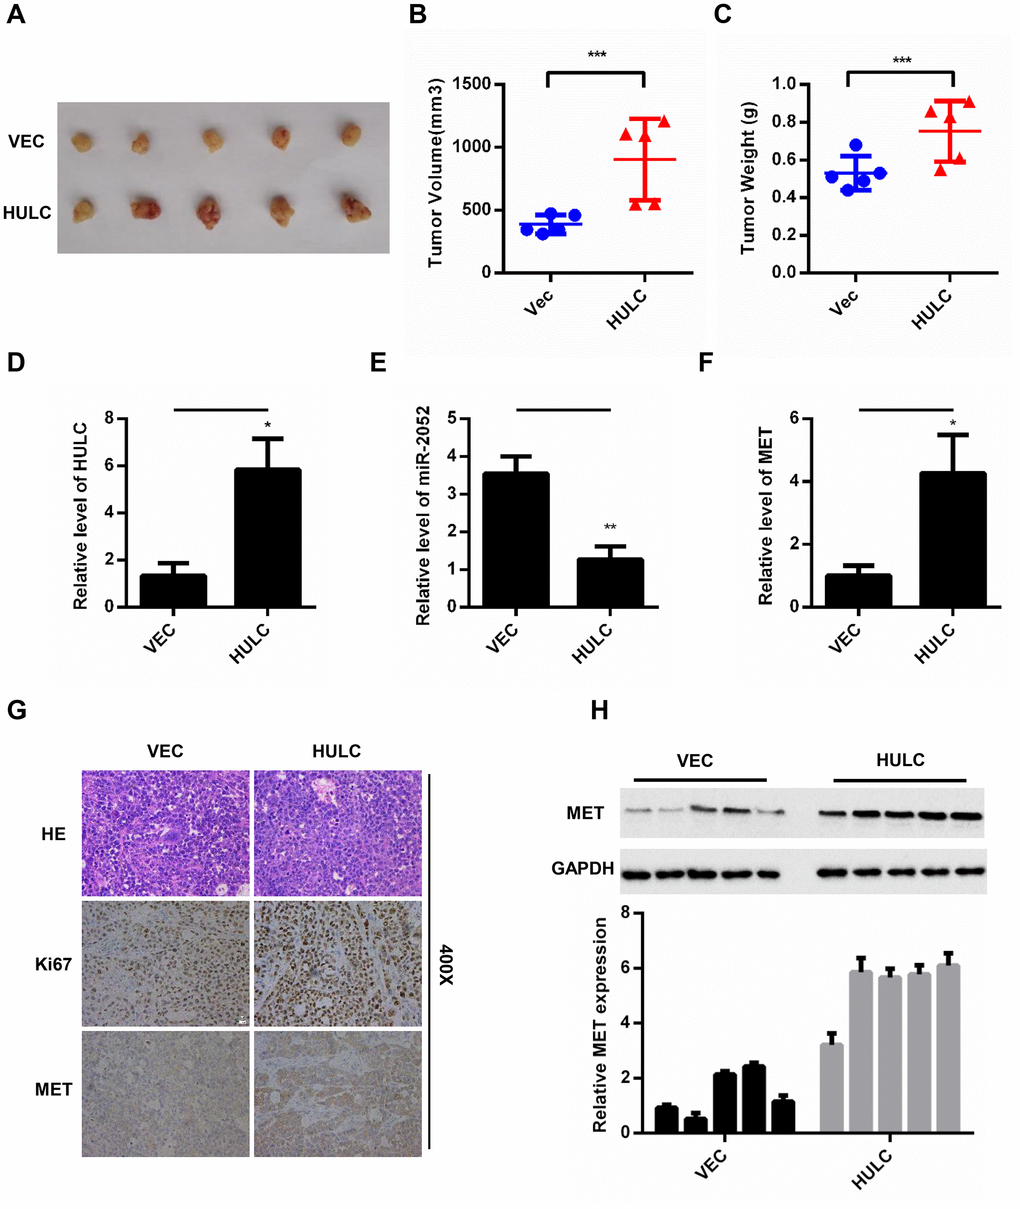 HULC promotes HCC growth through the miR-2052/MET axis in vivo. (A–C) Volume and weight measurements for tumors from nude mice injected with HLF cells stably overexpressing HULC. (D–F) Expression of HULC, miR-2052, and MET in tumor xenografts measured by qPCR. (G) Ki67 and MET levels measured by immunohistochemistry. (H) MET levels measured by western blot and gray level analysis. *P P P 